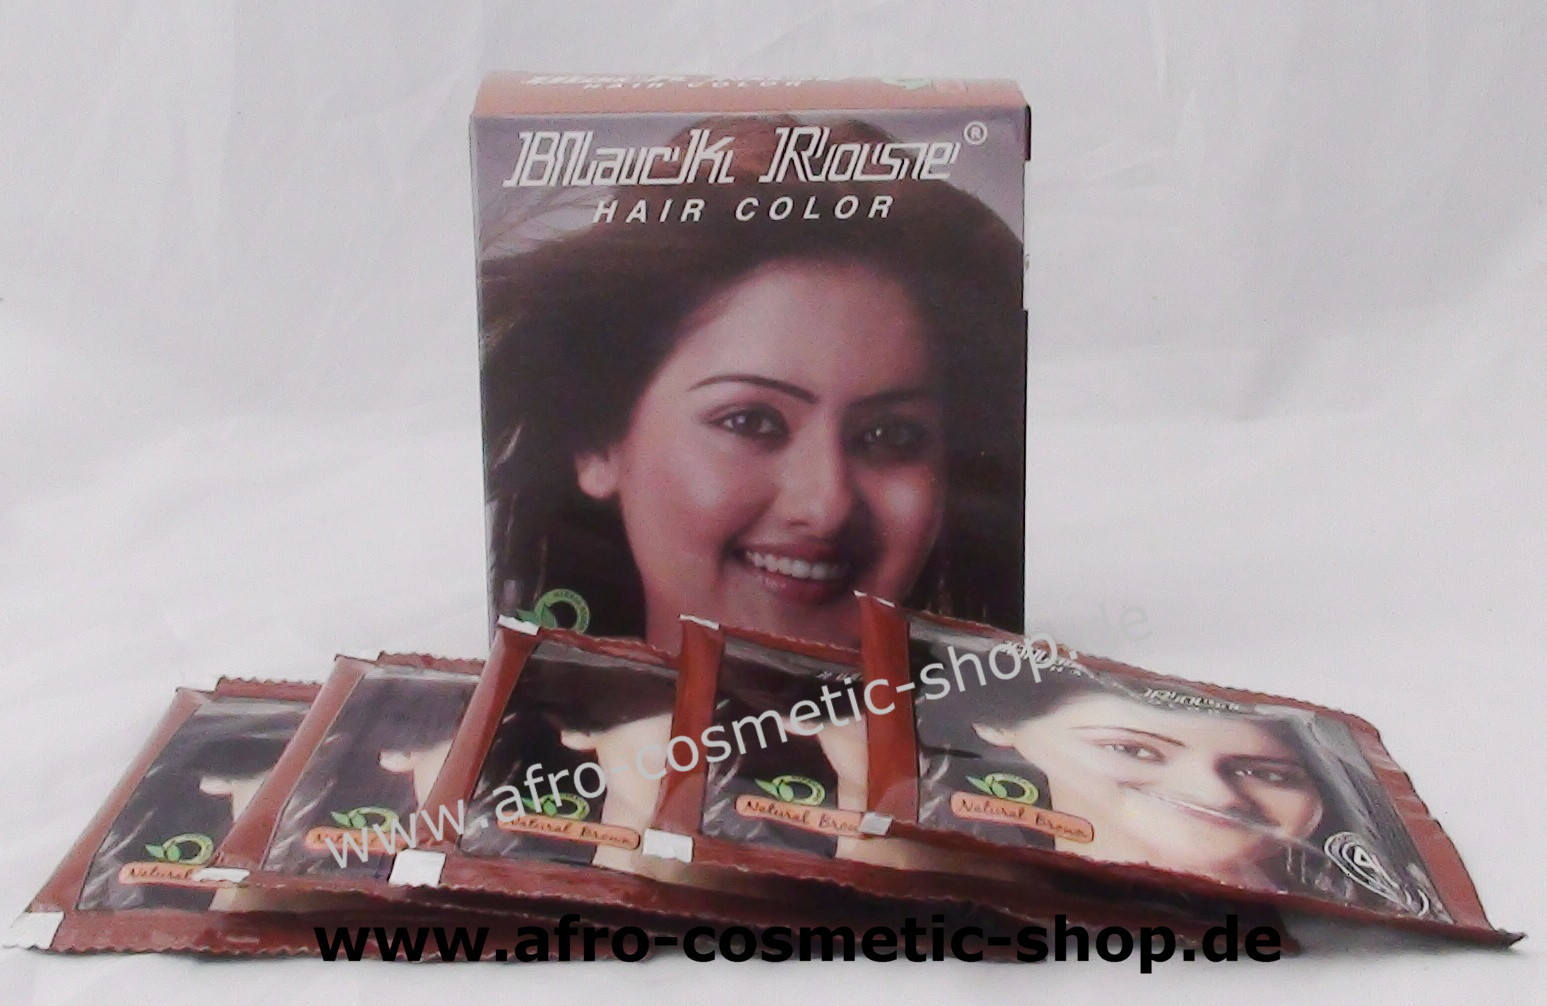 Black Rose Hair Color Natural Brown 50 g - Afro Cosmetic Shop